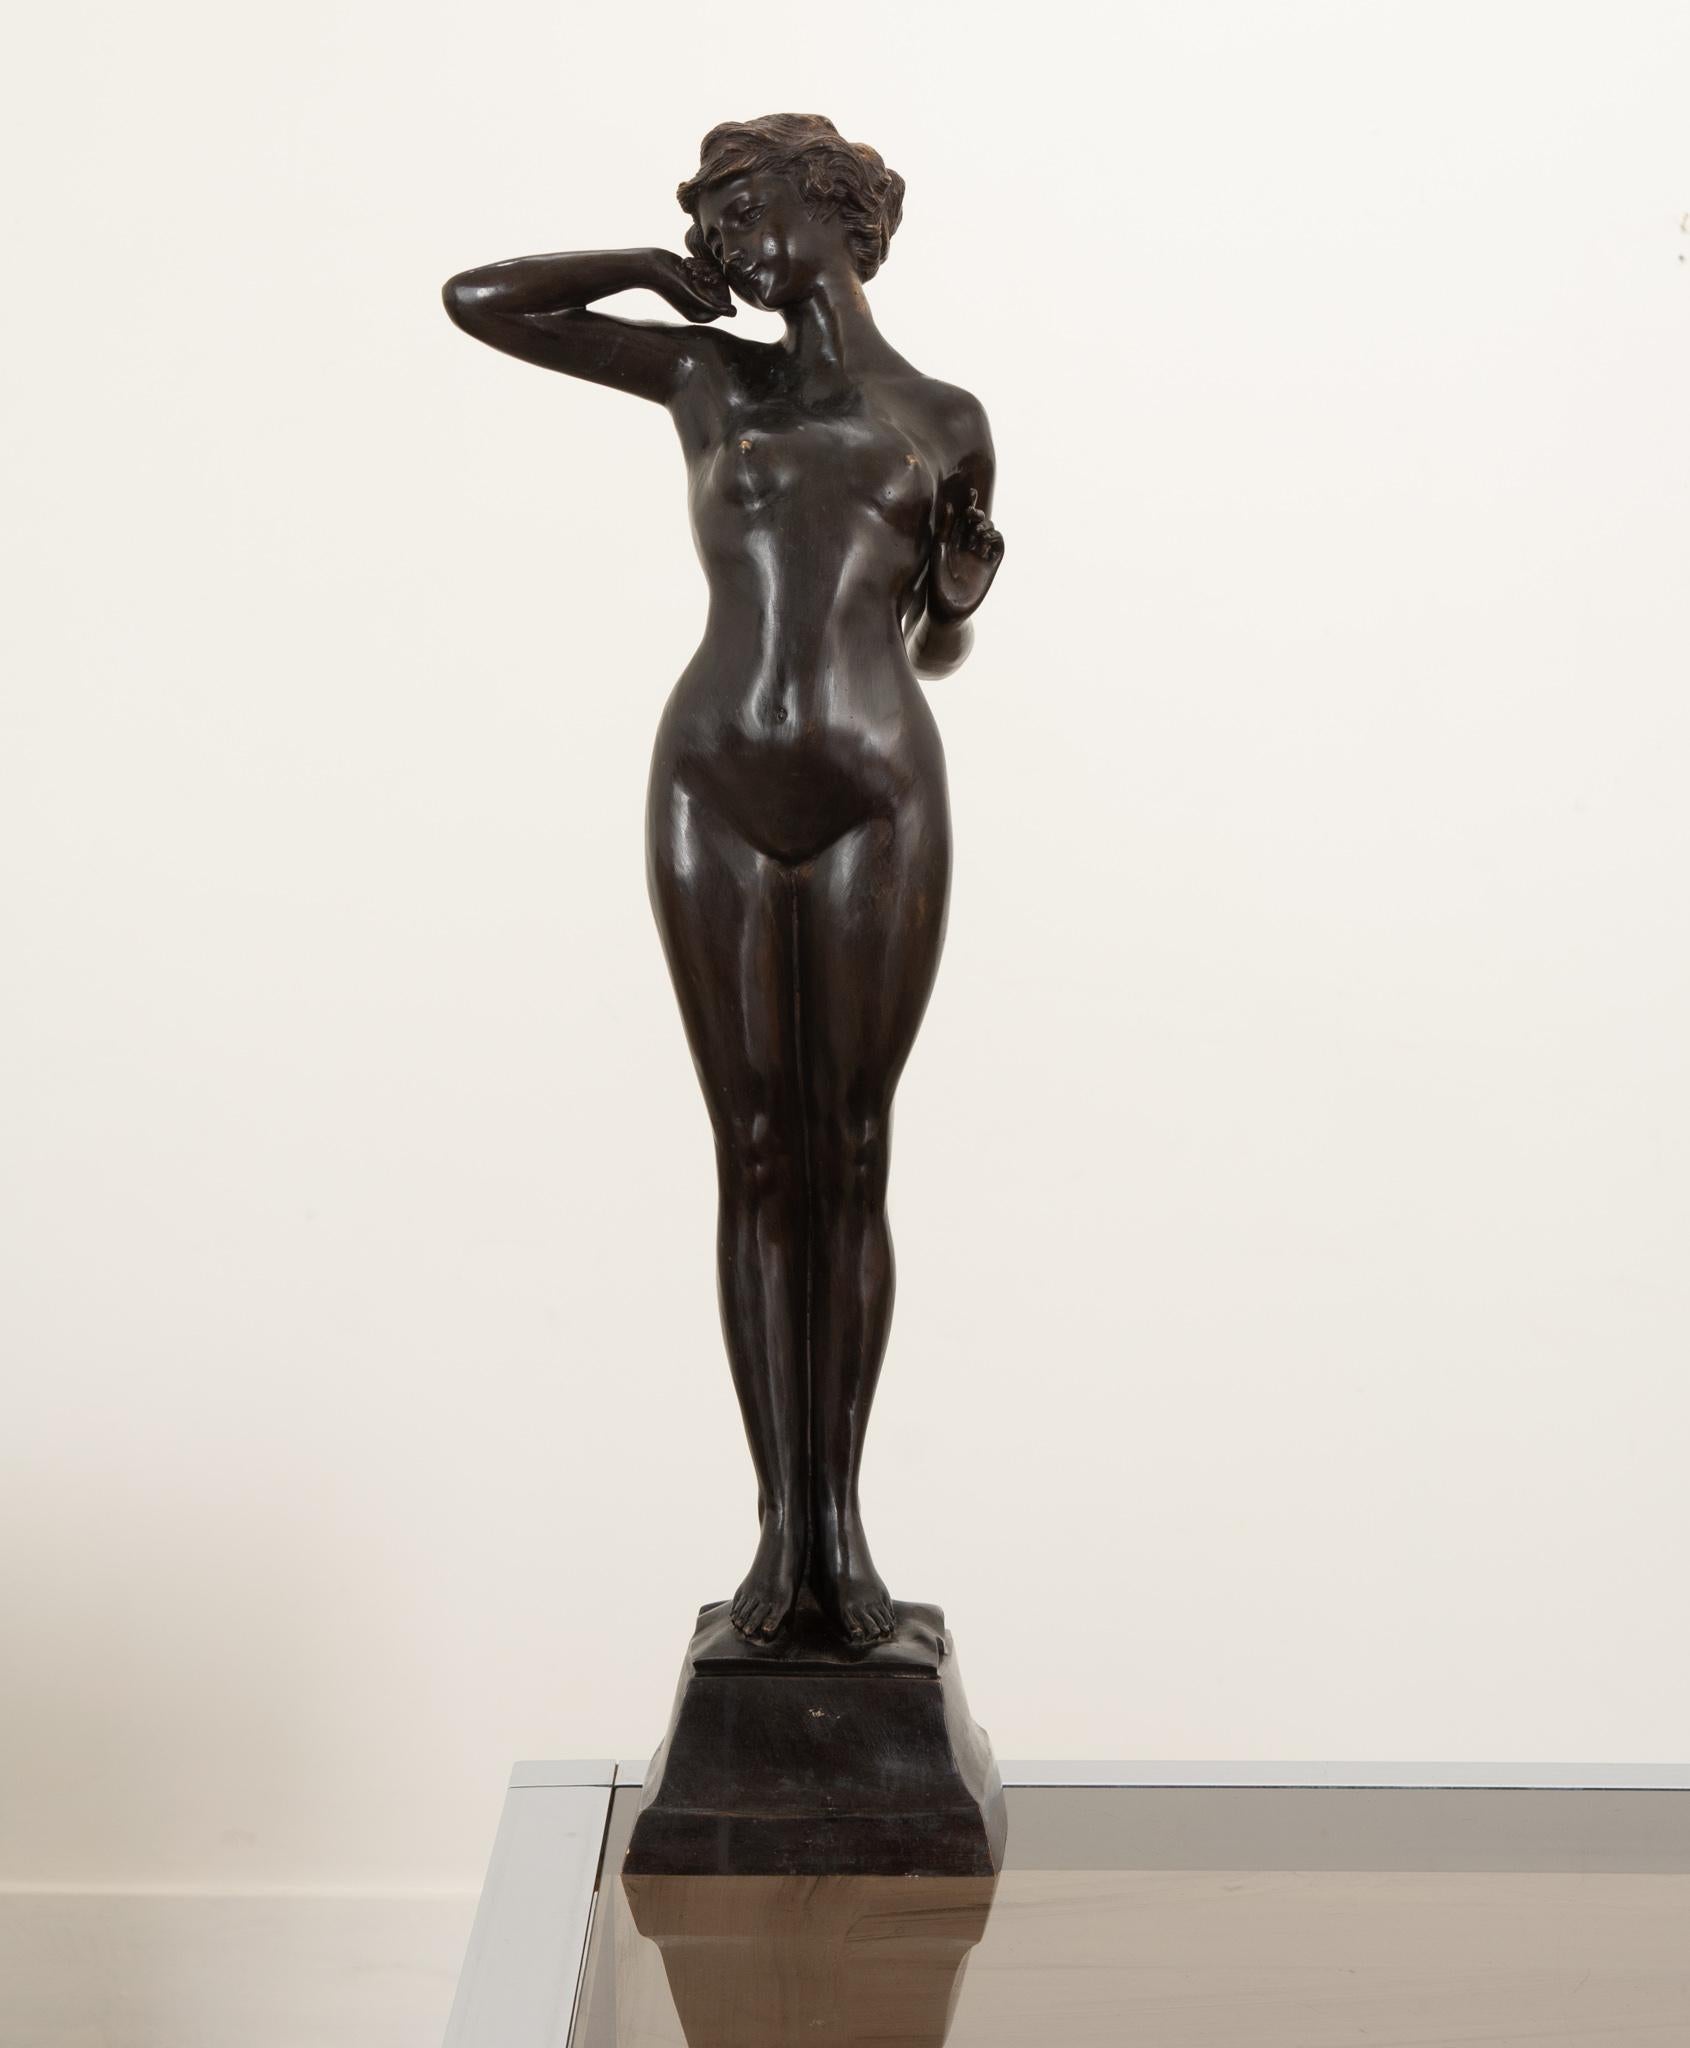 A beautiful bronze female nude crafted in France during the 19th century. The composition is well balanced, the figure in a classic stance to show off the artist's ability to recreate her anatomy. Wonderfully patinated. Make sure to view the